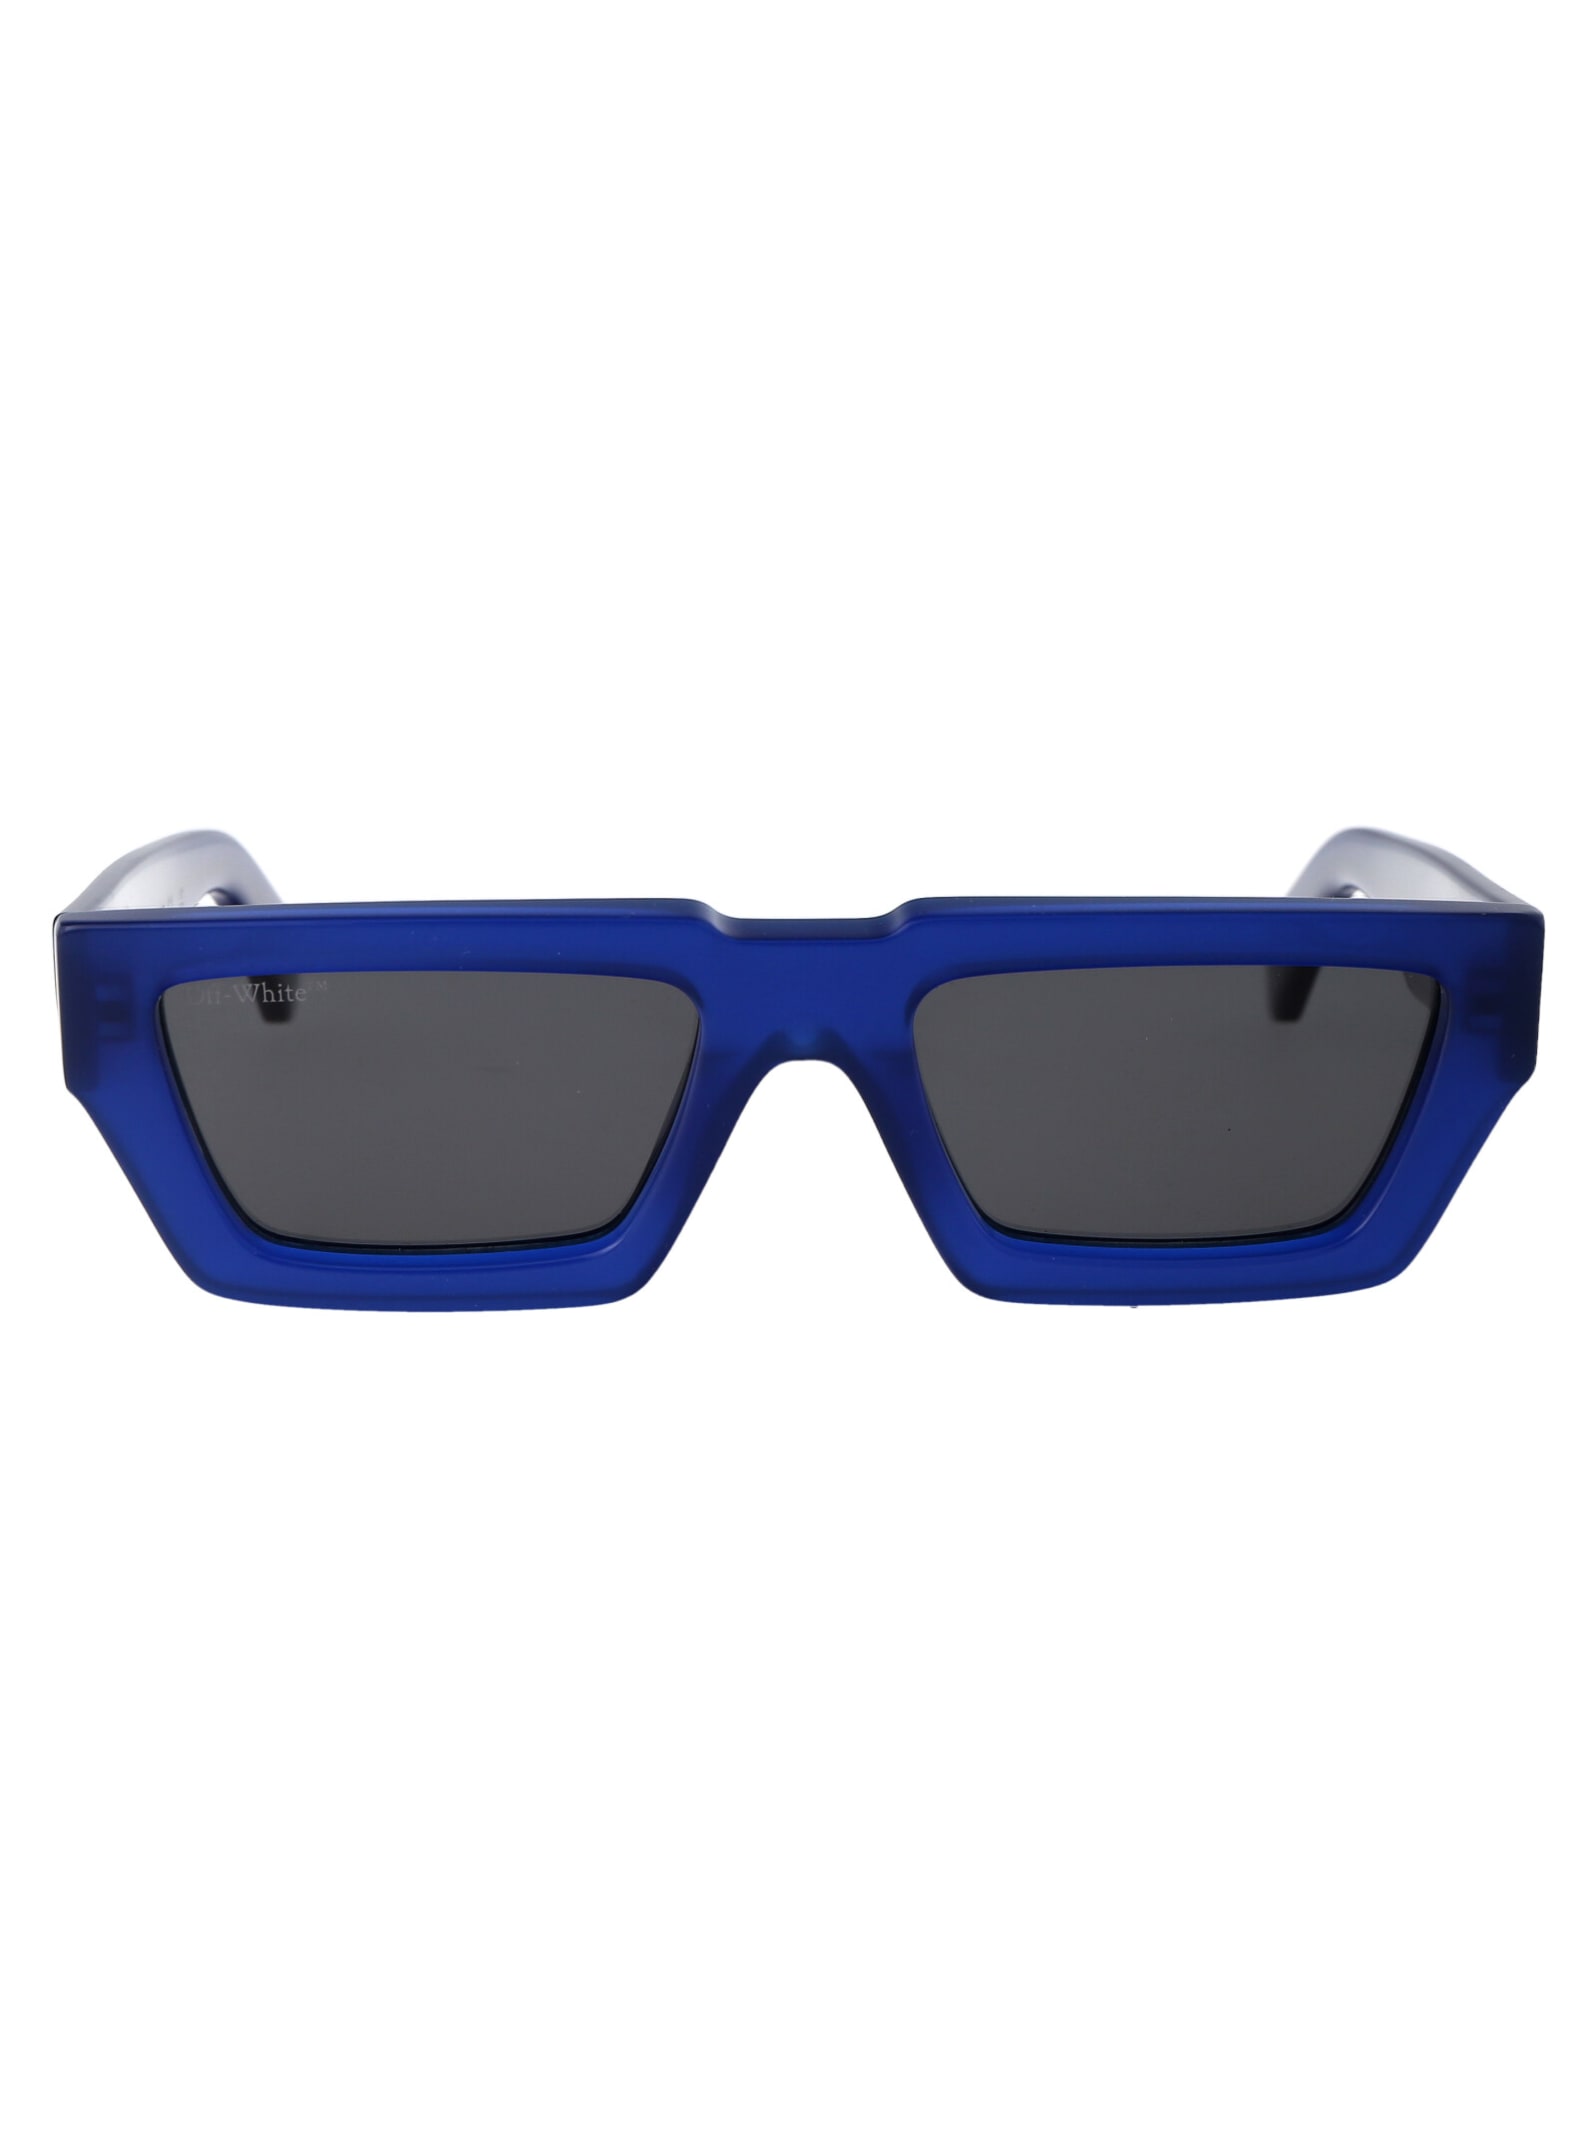 Off-white Manchester Sunglasses In 4607 Blue